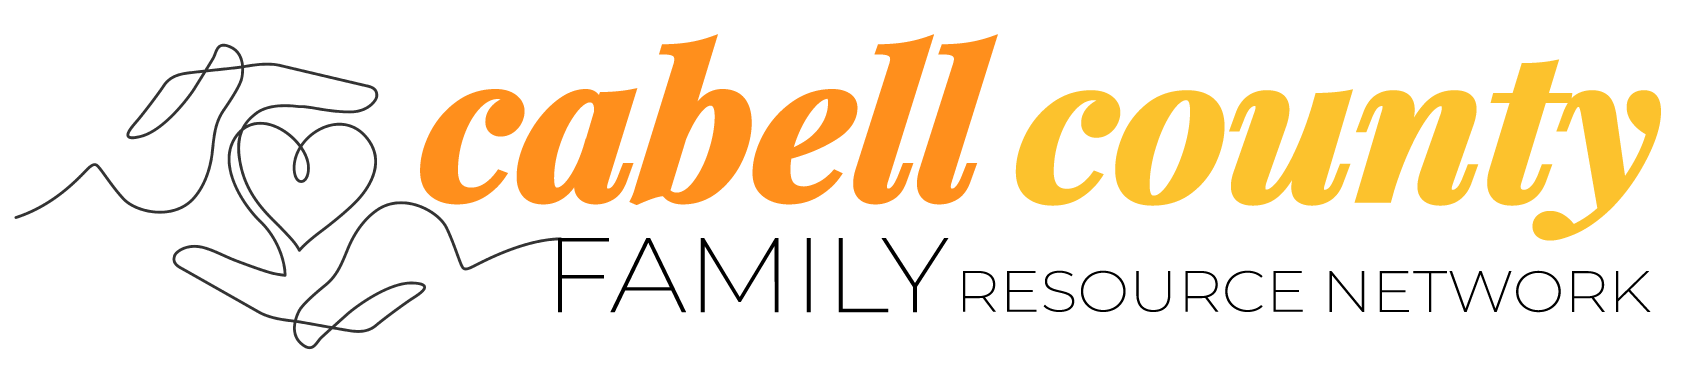 Cabell County Family Resource Network